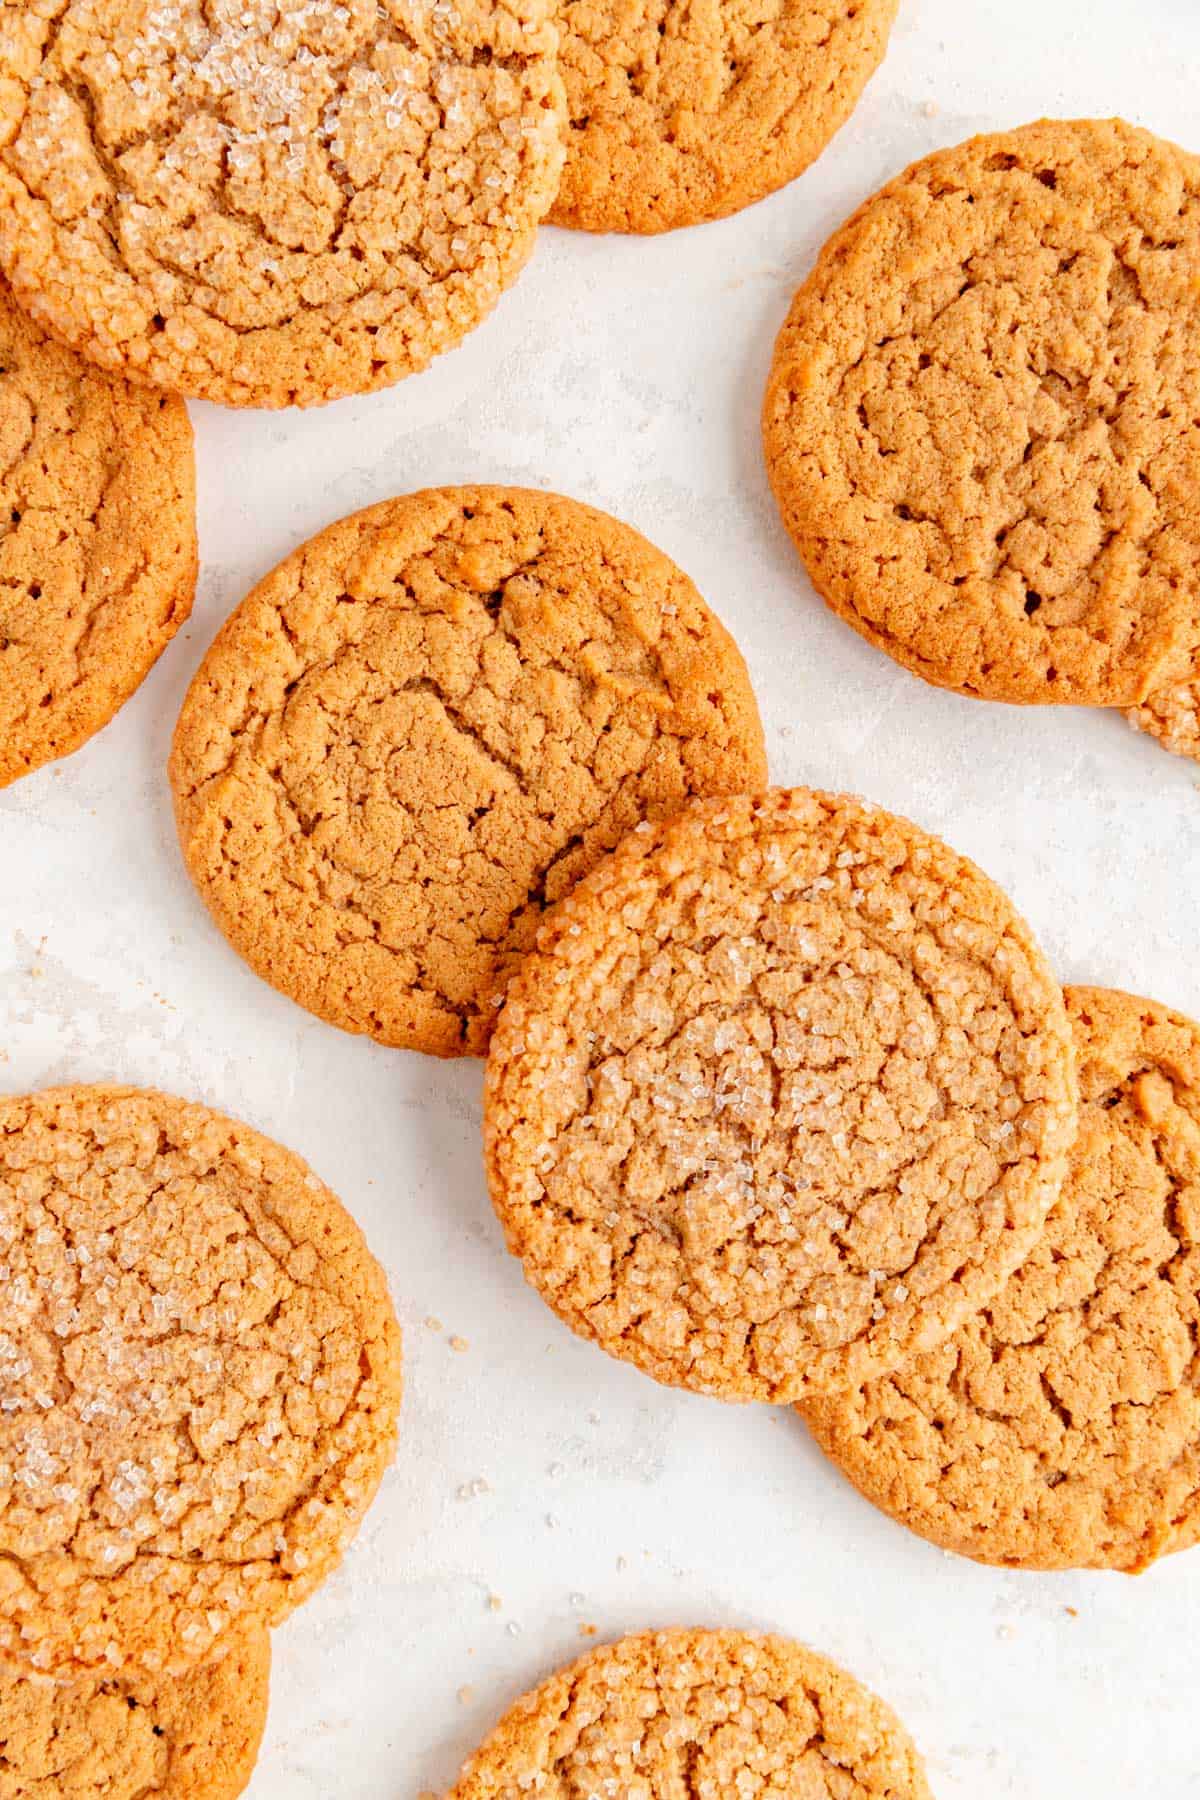 gluten free peanut butter cookies with and without sugar coating stack on white plaster background.